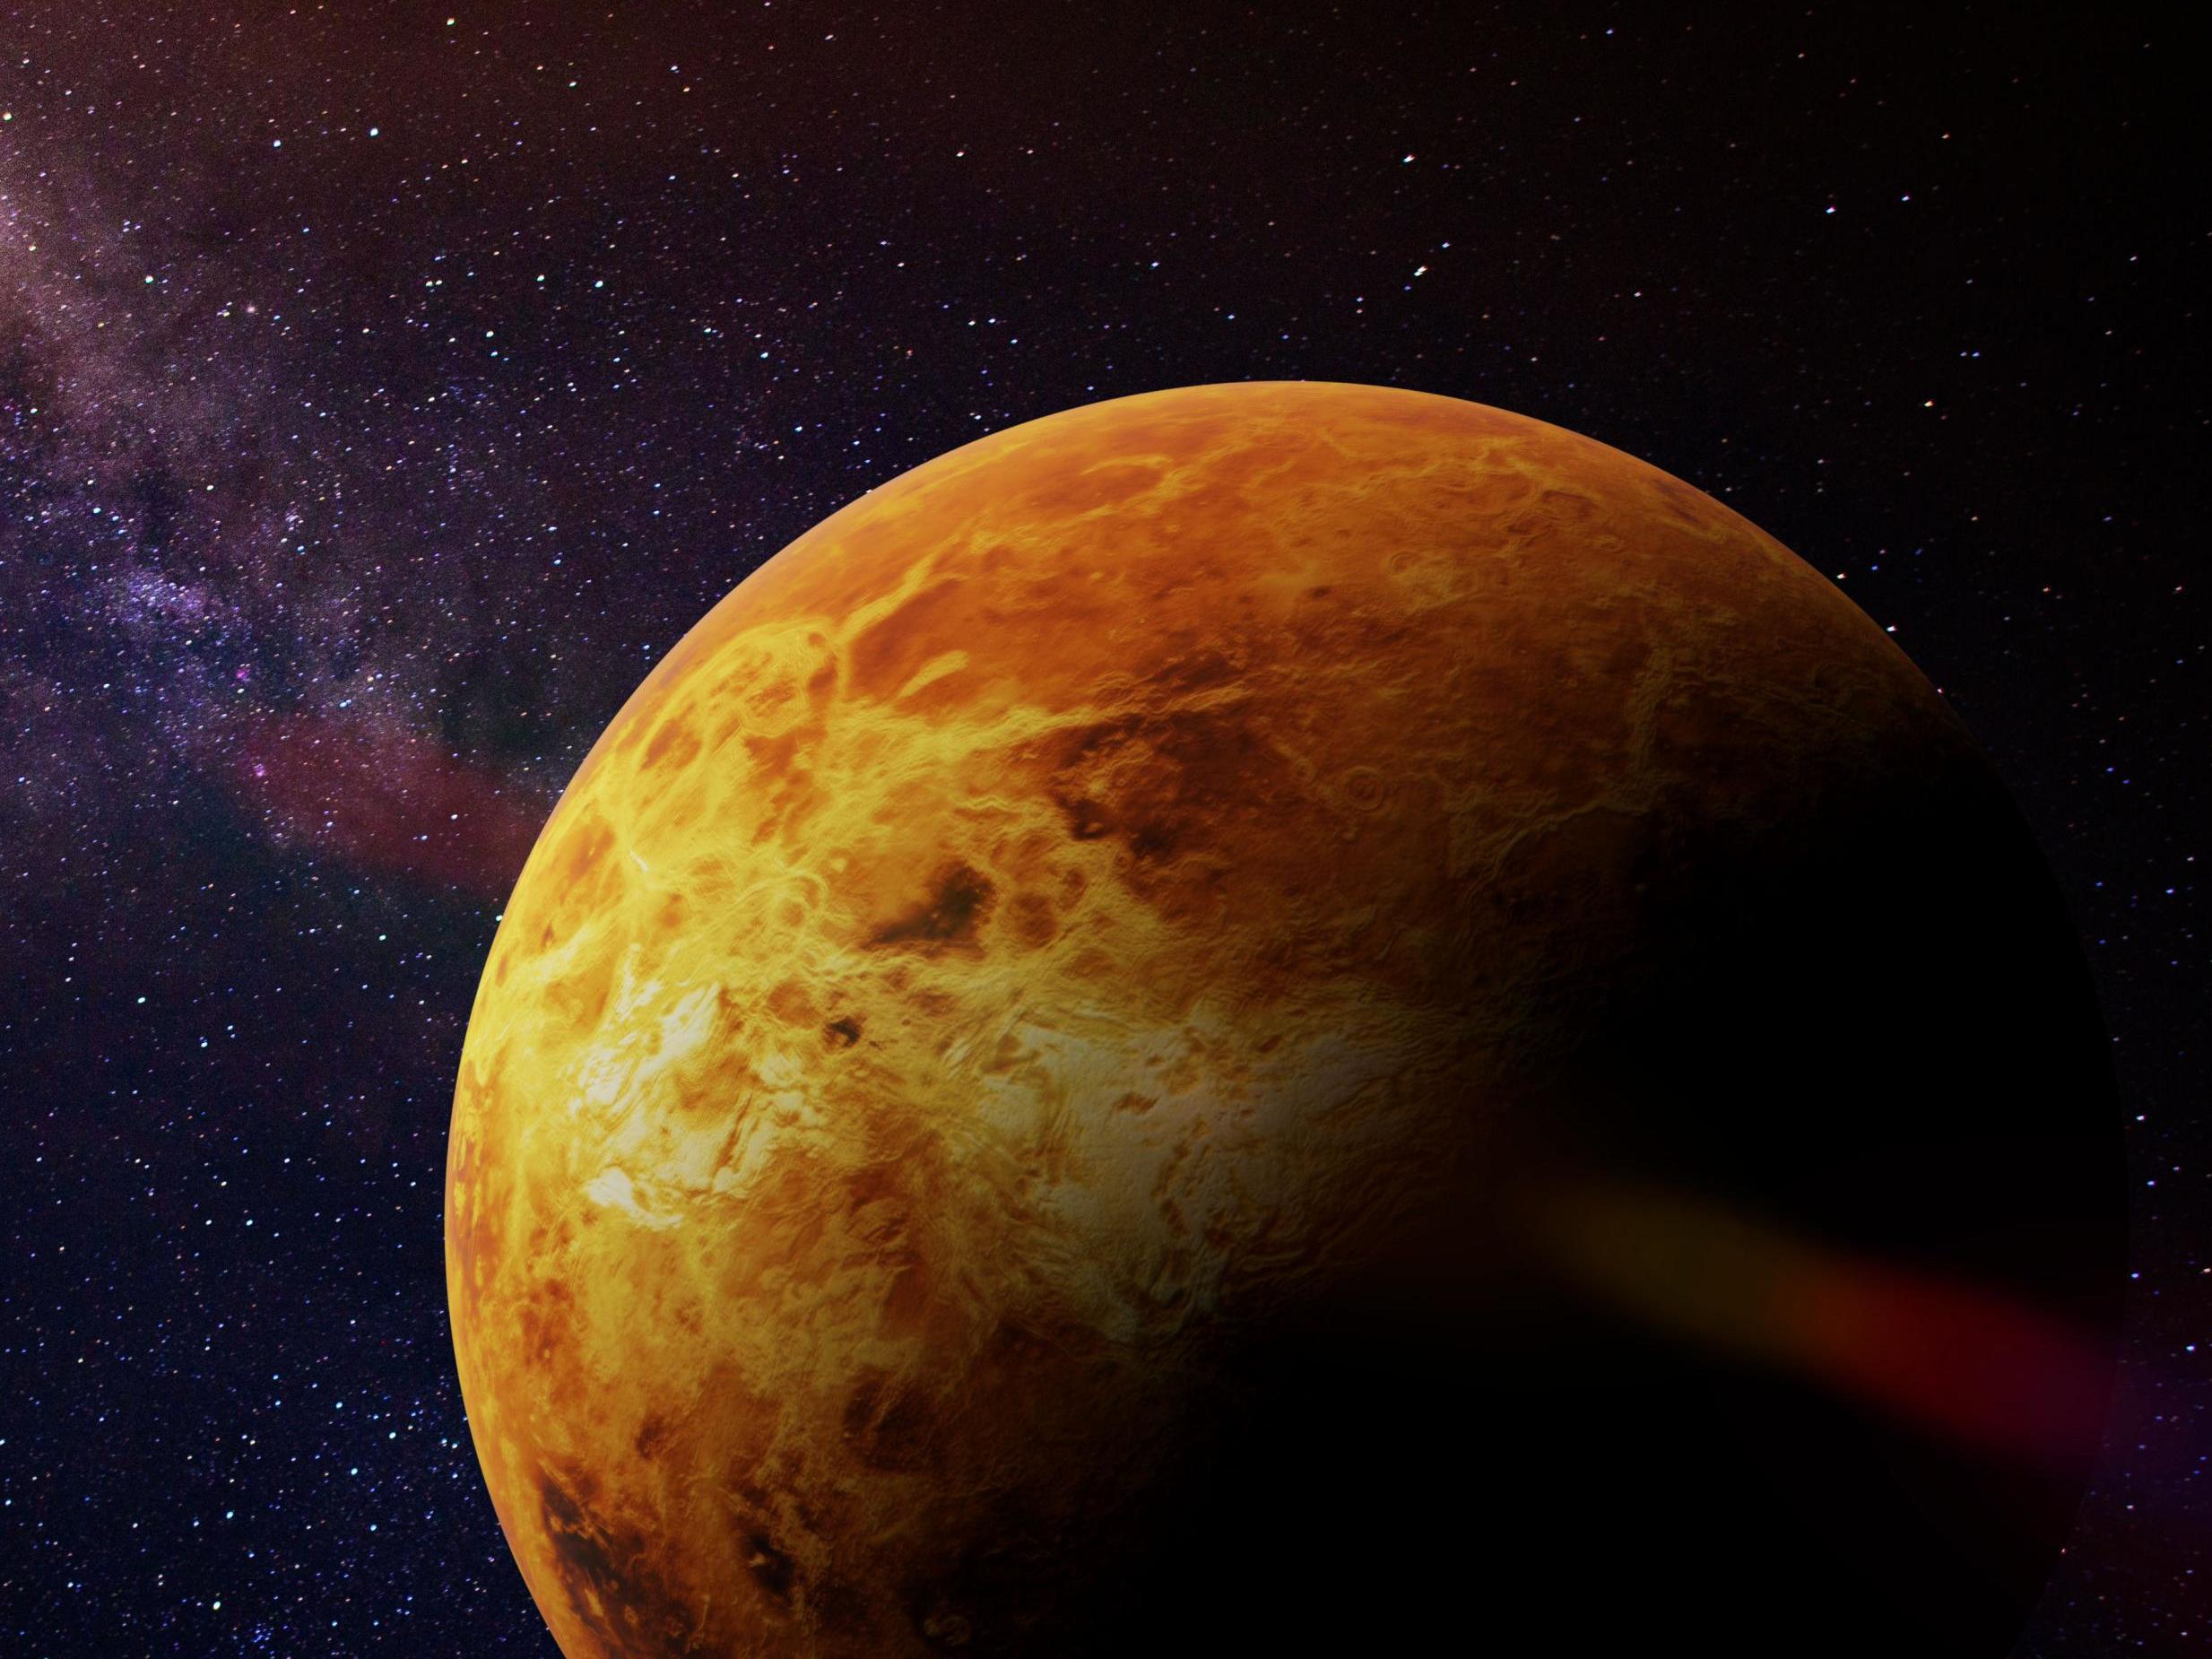 It's possible Venus was once a blue planet, like Earth